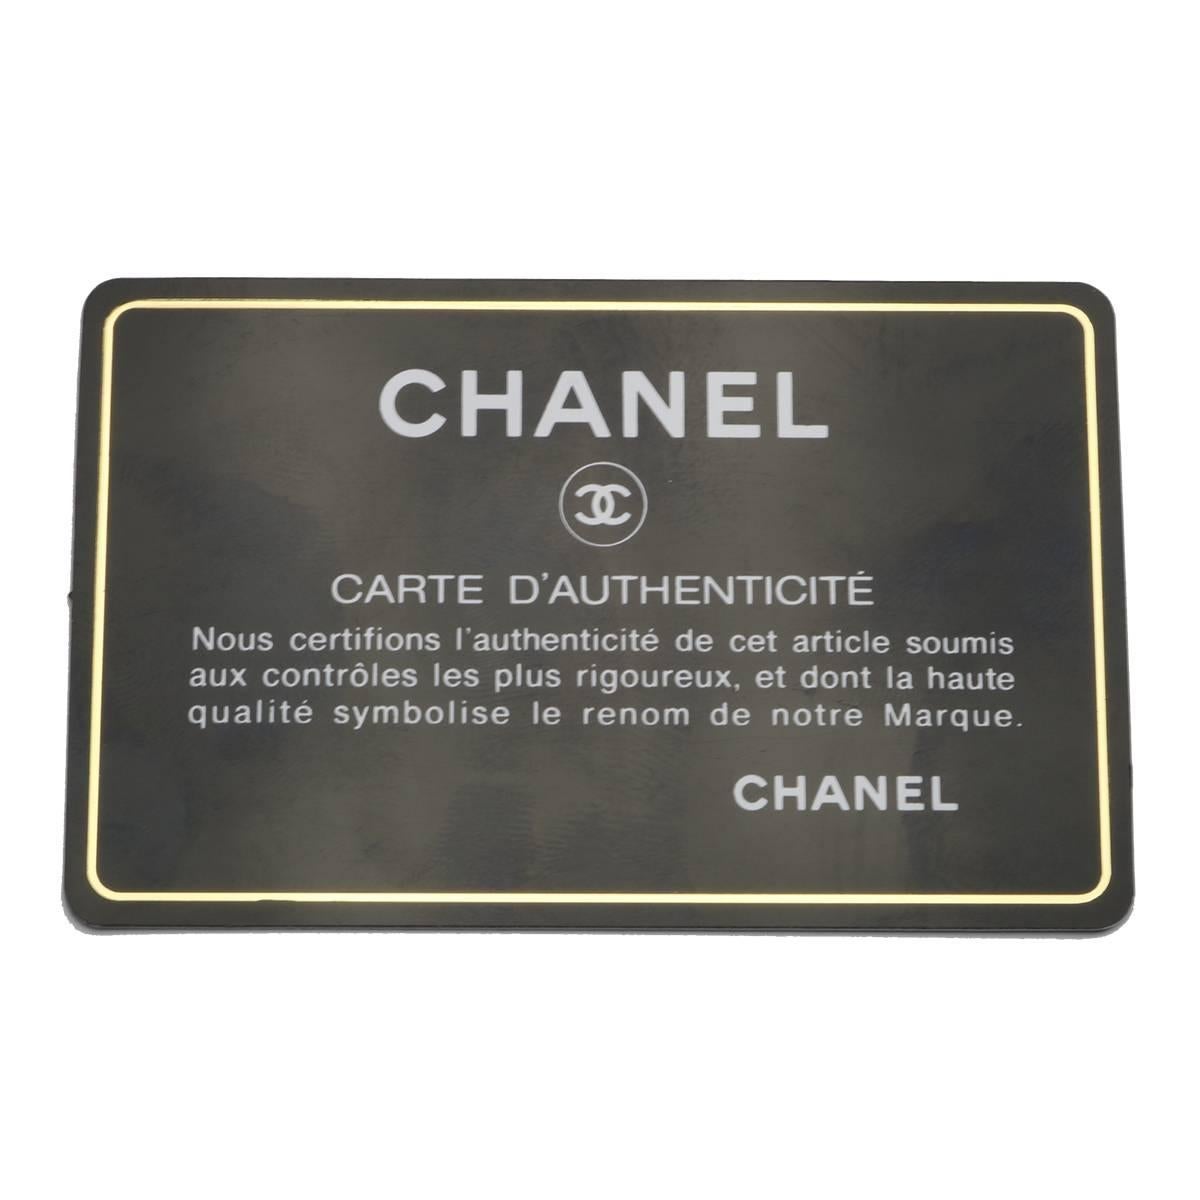 CHANEL Black Calfskin Large O Case-Pouch 2017 5